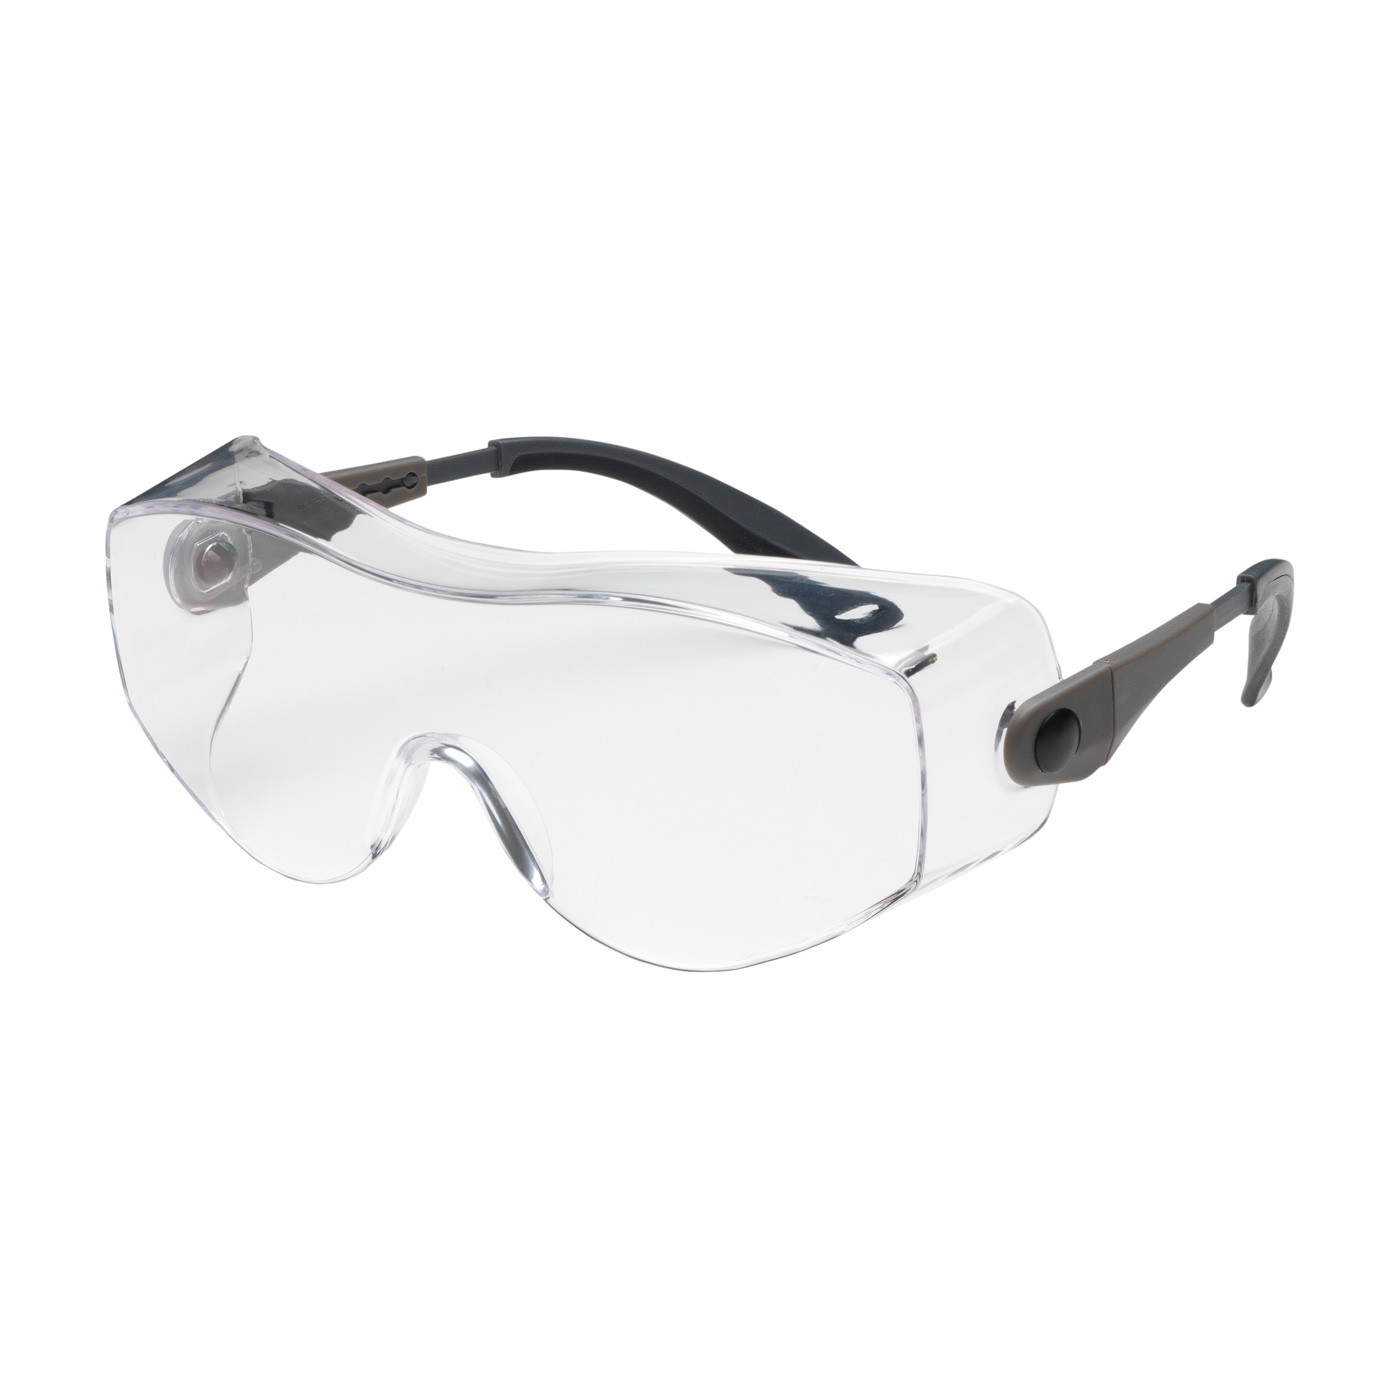 OverSite™ OTG Rimless Safety Glasses with Black / Gray Temple, Clear Lens and Anti-Fog / Anti-Scratch Coating  (#250-98-0020)